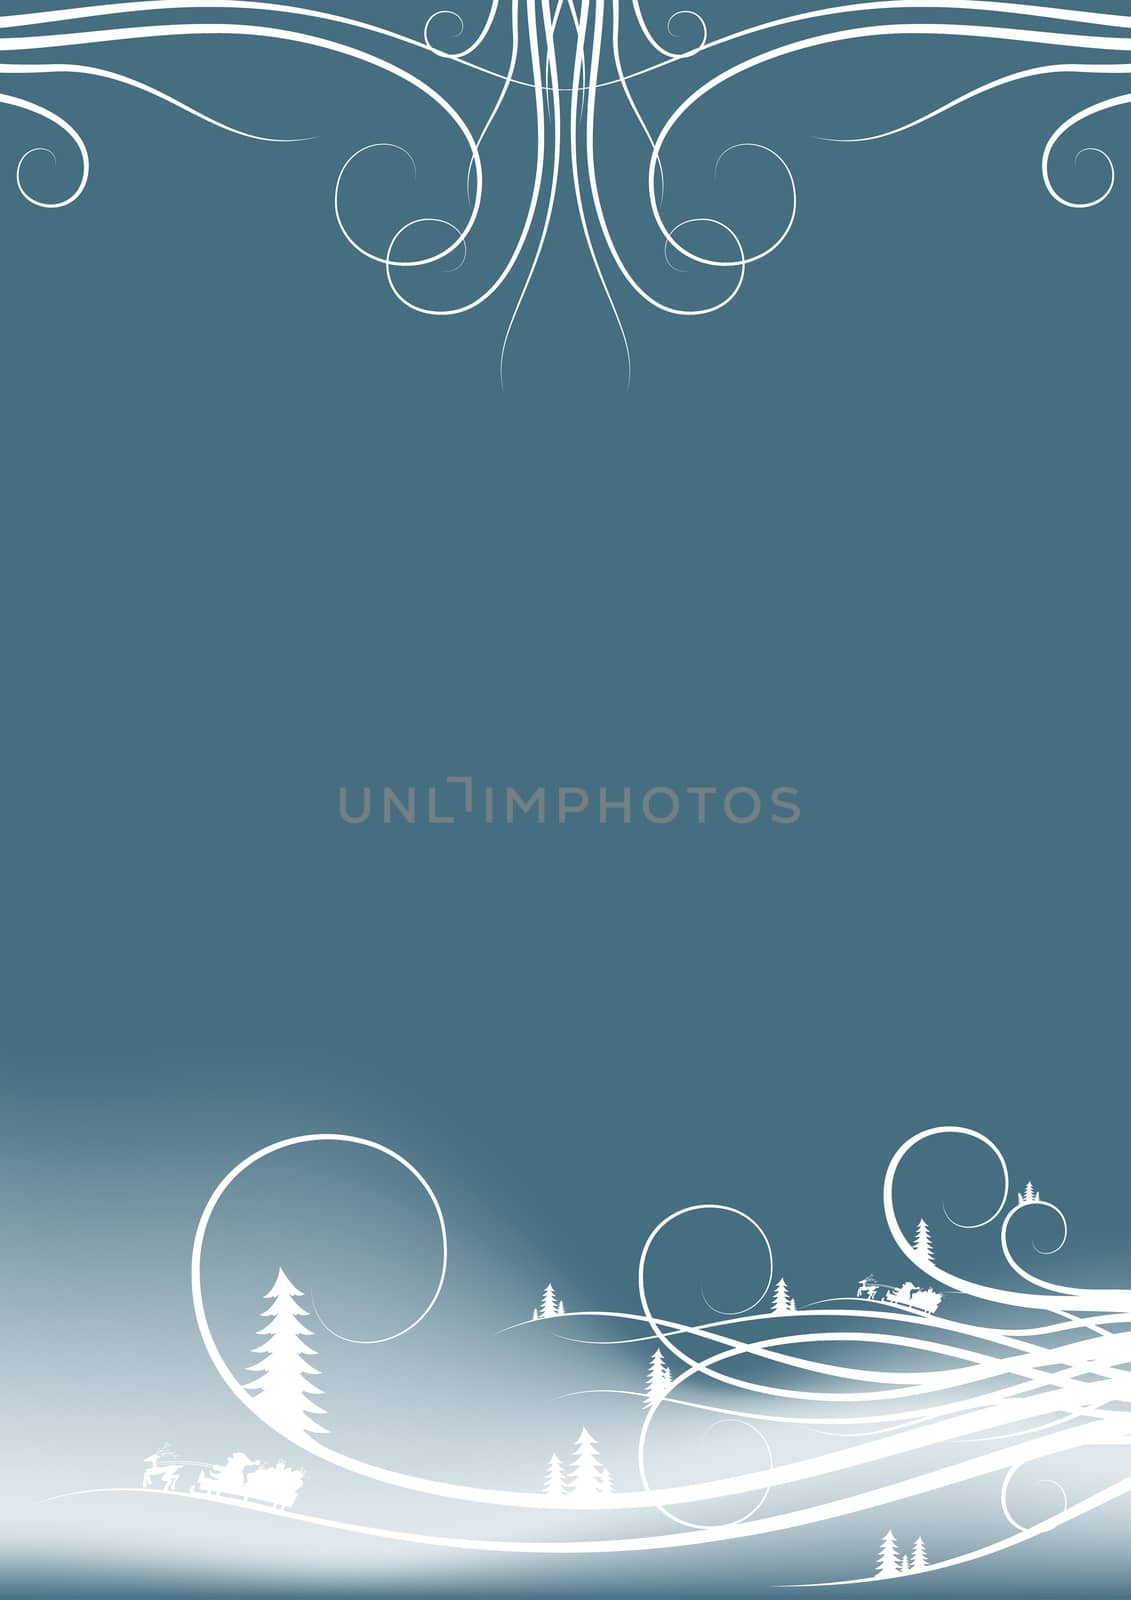 abstract winter background with firtree silhouettes and Santa Cl by WaD